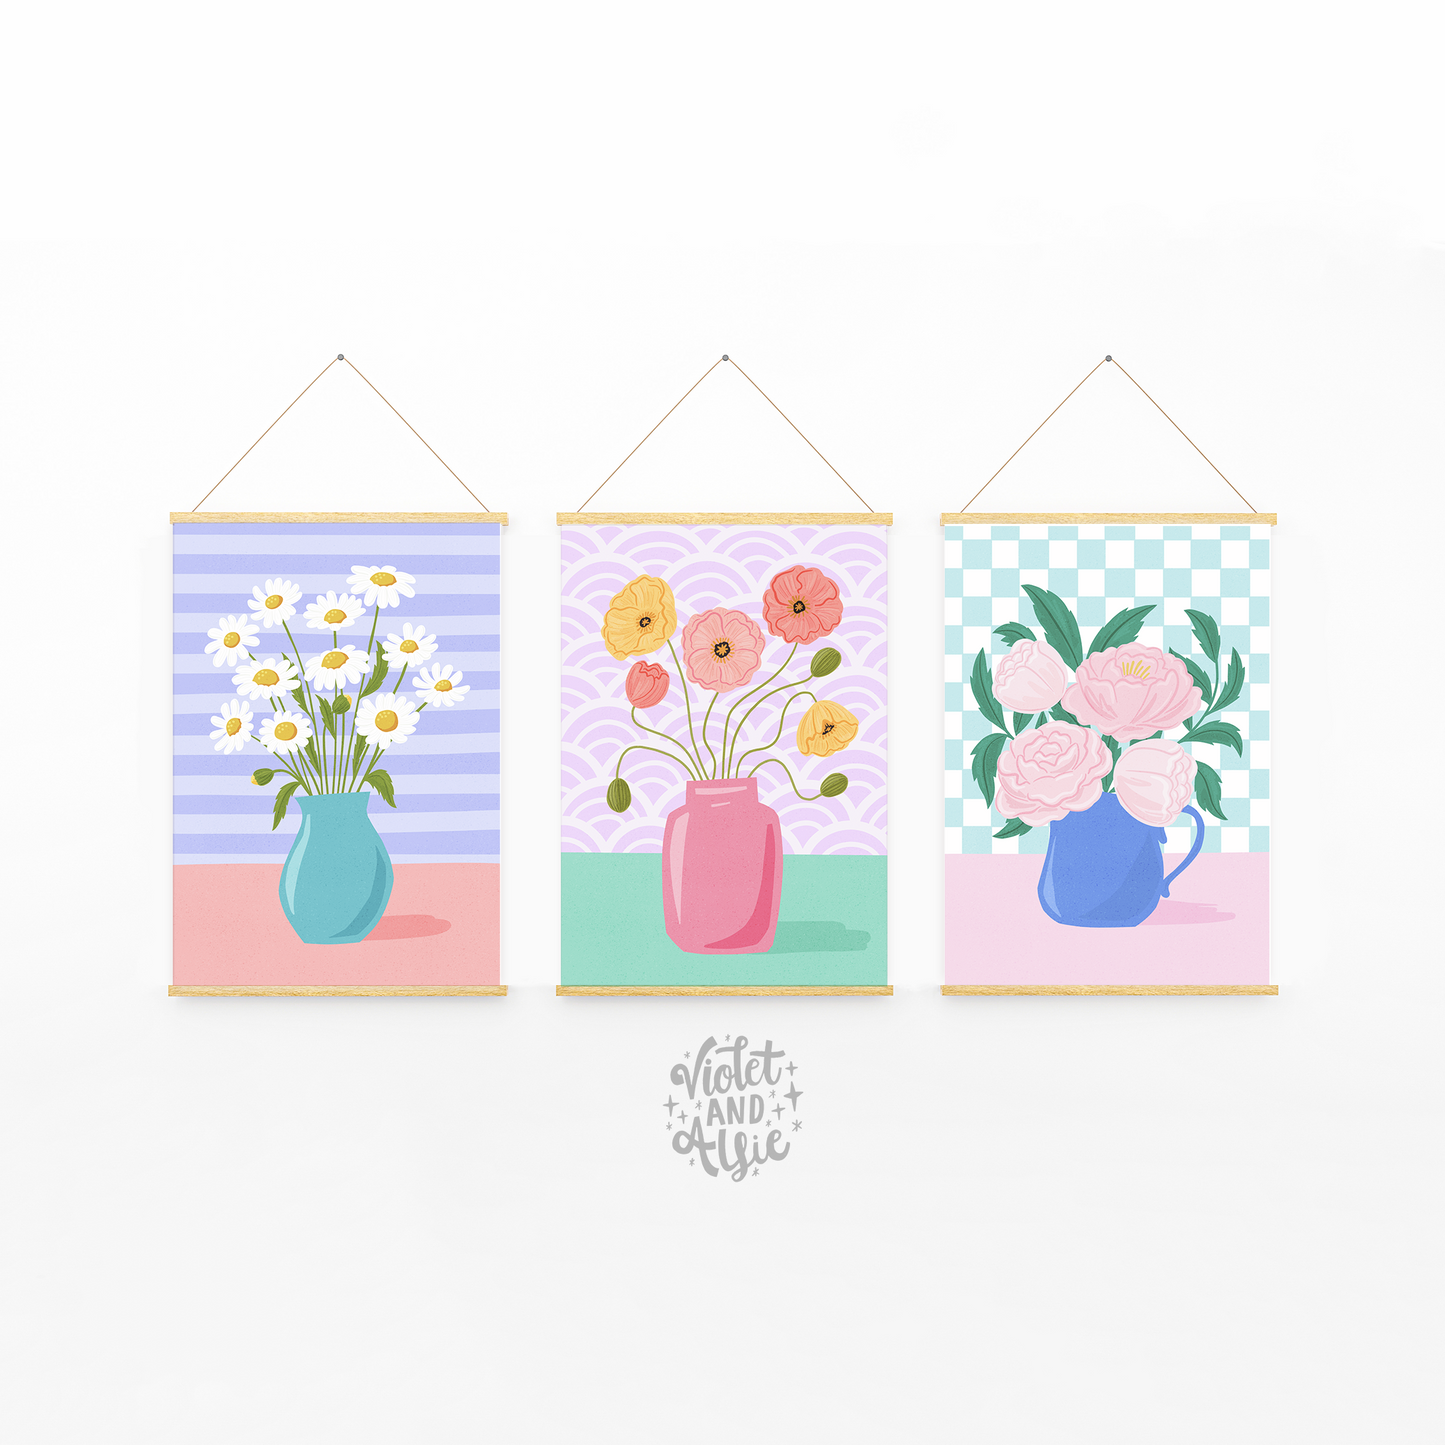 This gorgeous eclectic pastel print set is fab for bringing the outside in and adding some fresh floral illustration to brighten up any space. It includes our Peony, Poppy and Daisy modern botanical designs. Set of Three Floral Illustration Prints, Trendy Flower Wall Art, trendy prints for your home, pastel aesthetic decor, pastel floral wall prints, flower posters, home office decor art, trendy flower art prints 